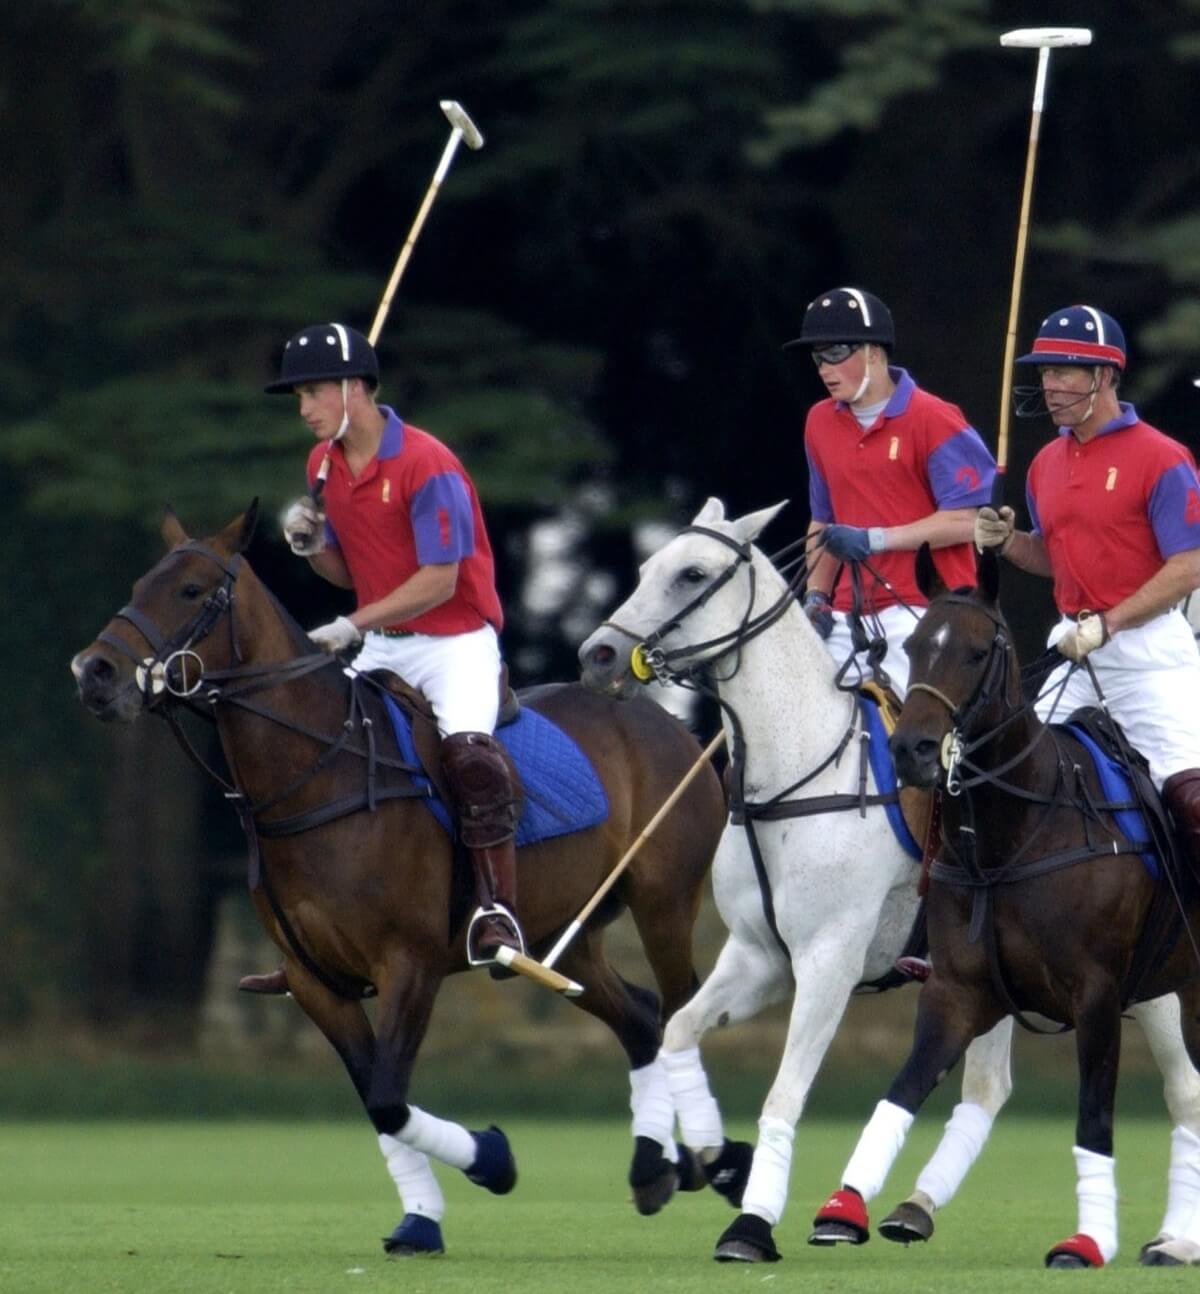 Then-Prince Charles with Prince William and Prince Harry playing polo together in Gloucestershire